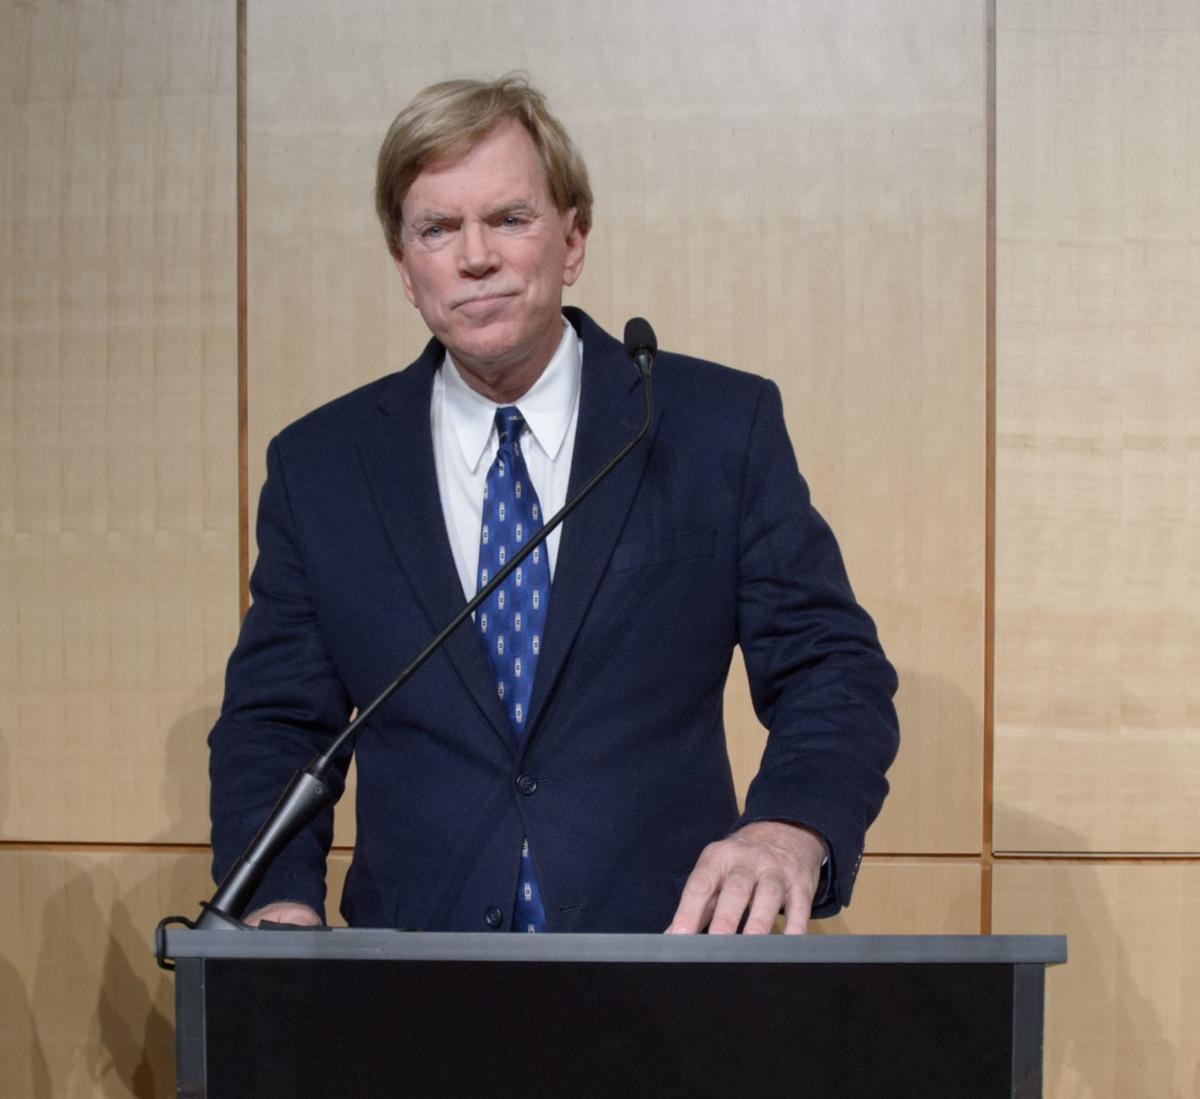 David Duke Says Hell Appeal Permanent Twitter Ban His Foes However Laud The Suspension 